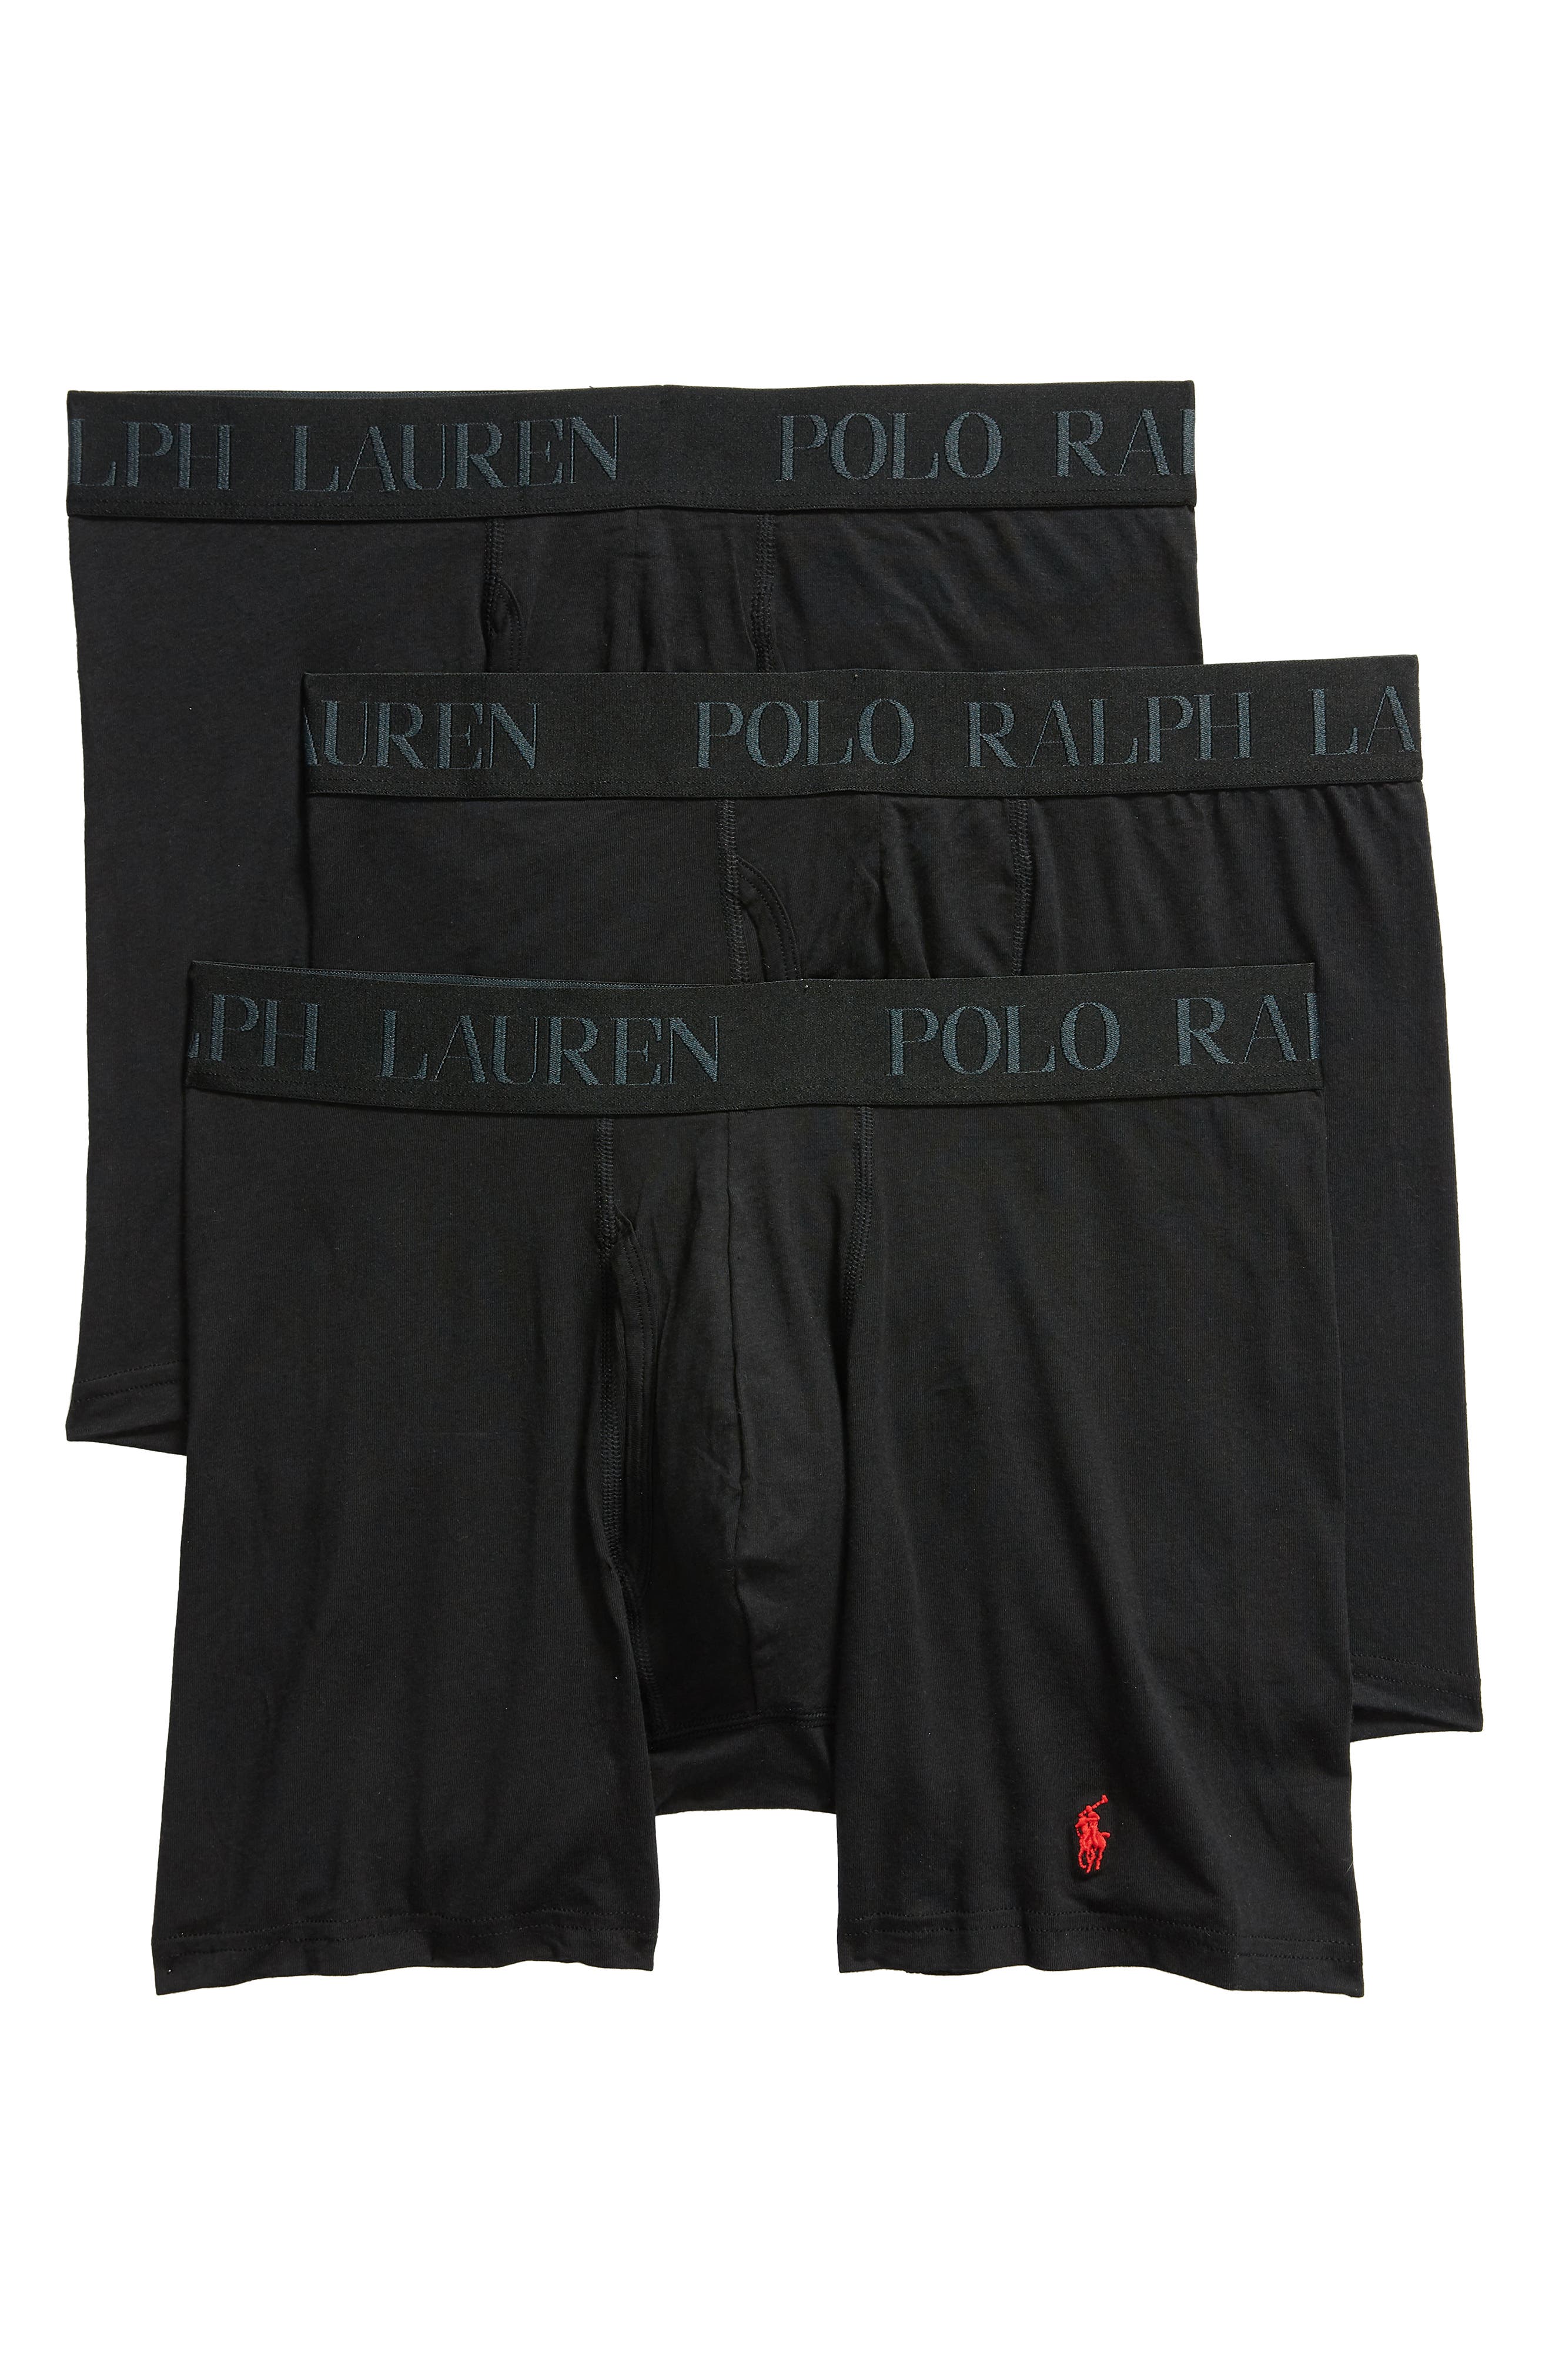 polo and ralph lauren